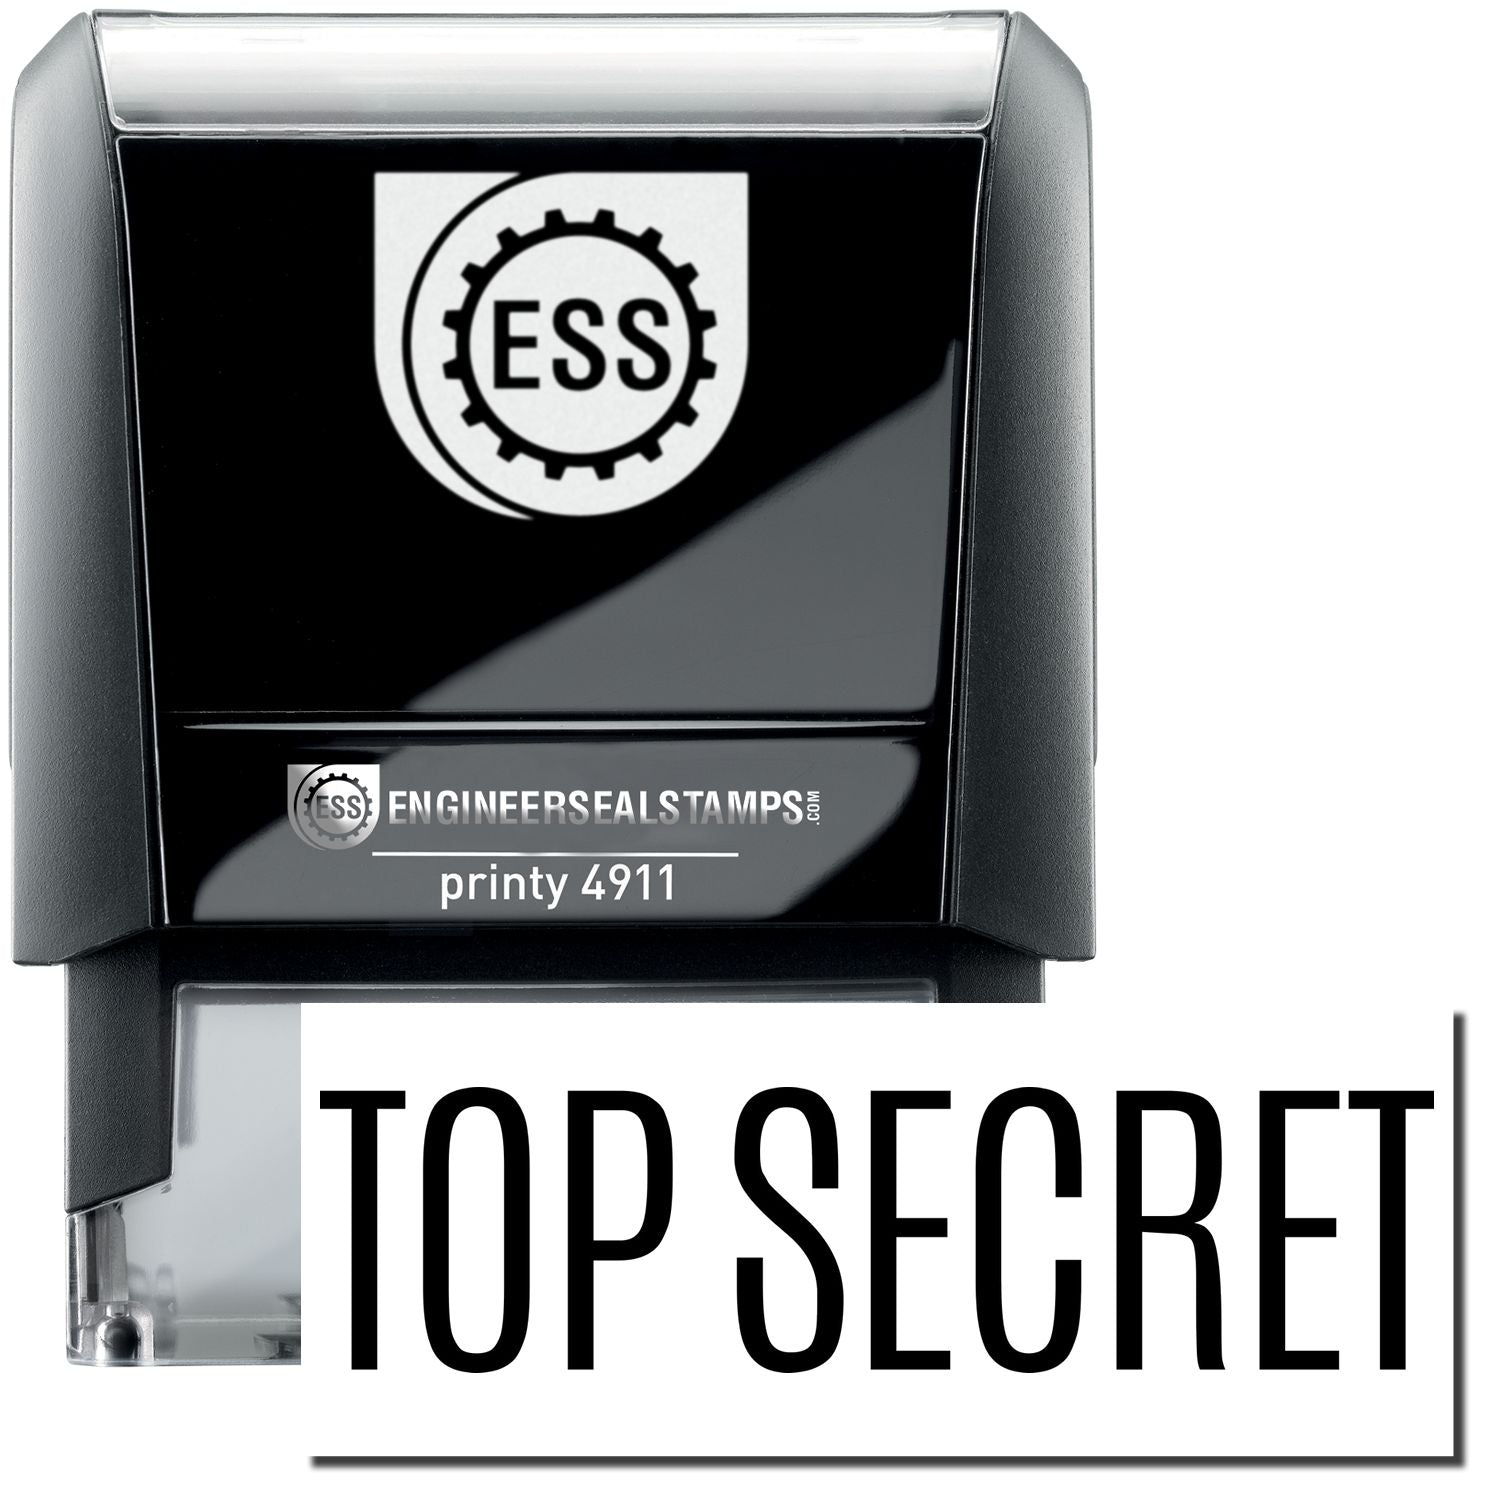 A self-inking stamp with a stamped image showing how the text "TOP SECRET" is displayed after stamping.